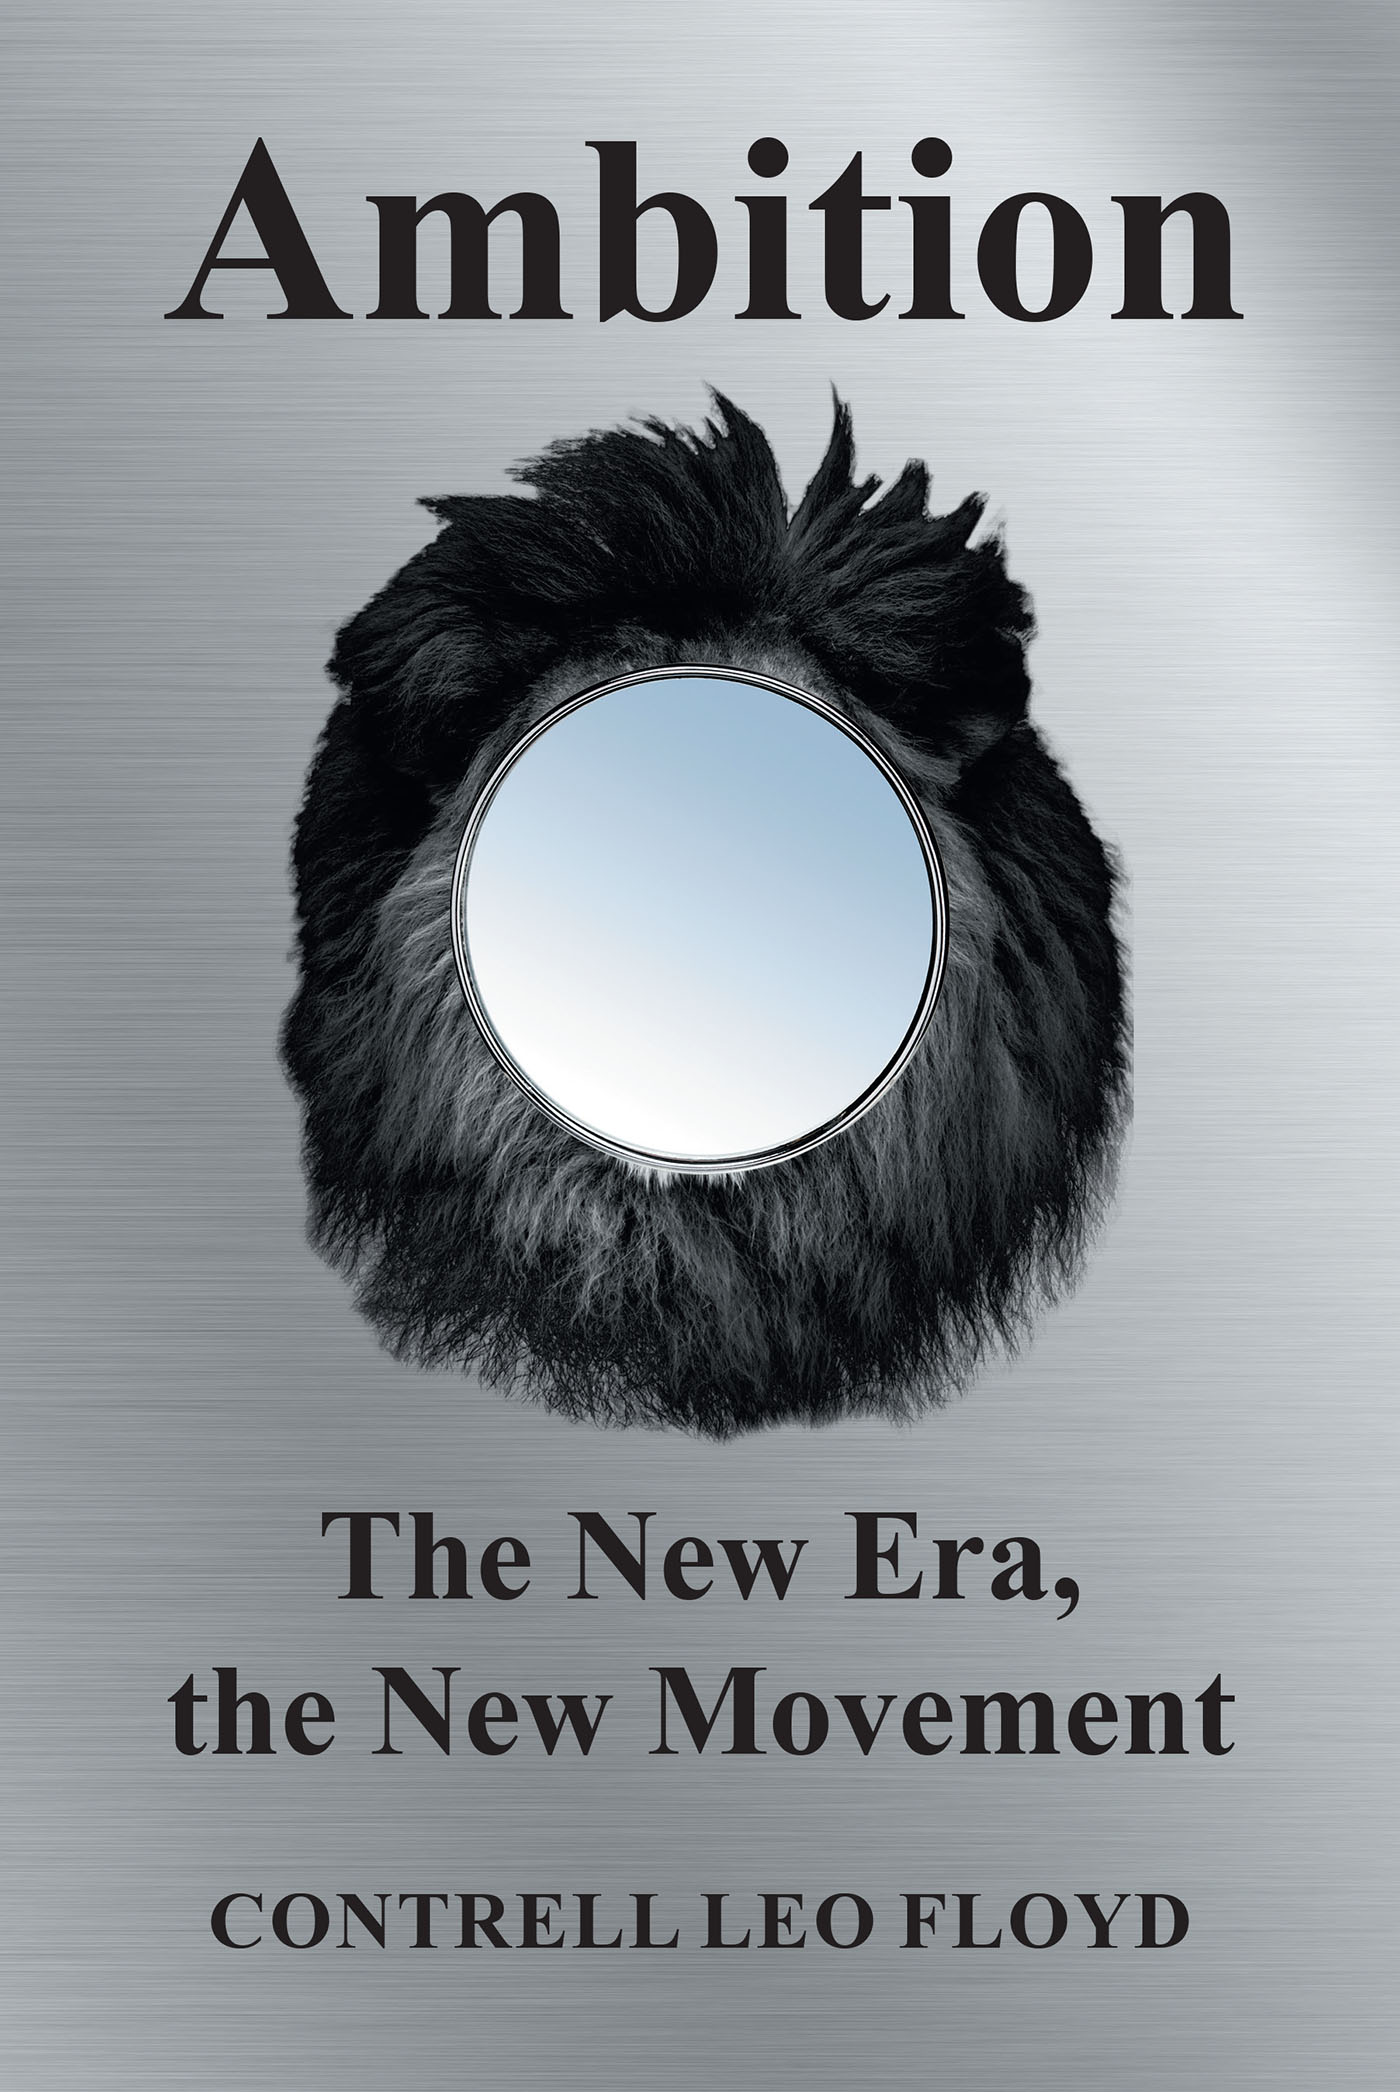 Author Contrell Leo Floyd’s New Book, "Ambition the New Era, the New Movement," Encourages Readers to Take Charge of Their Lives and Stay True to Their Beliefs